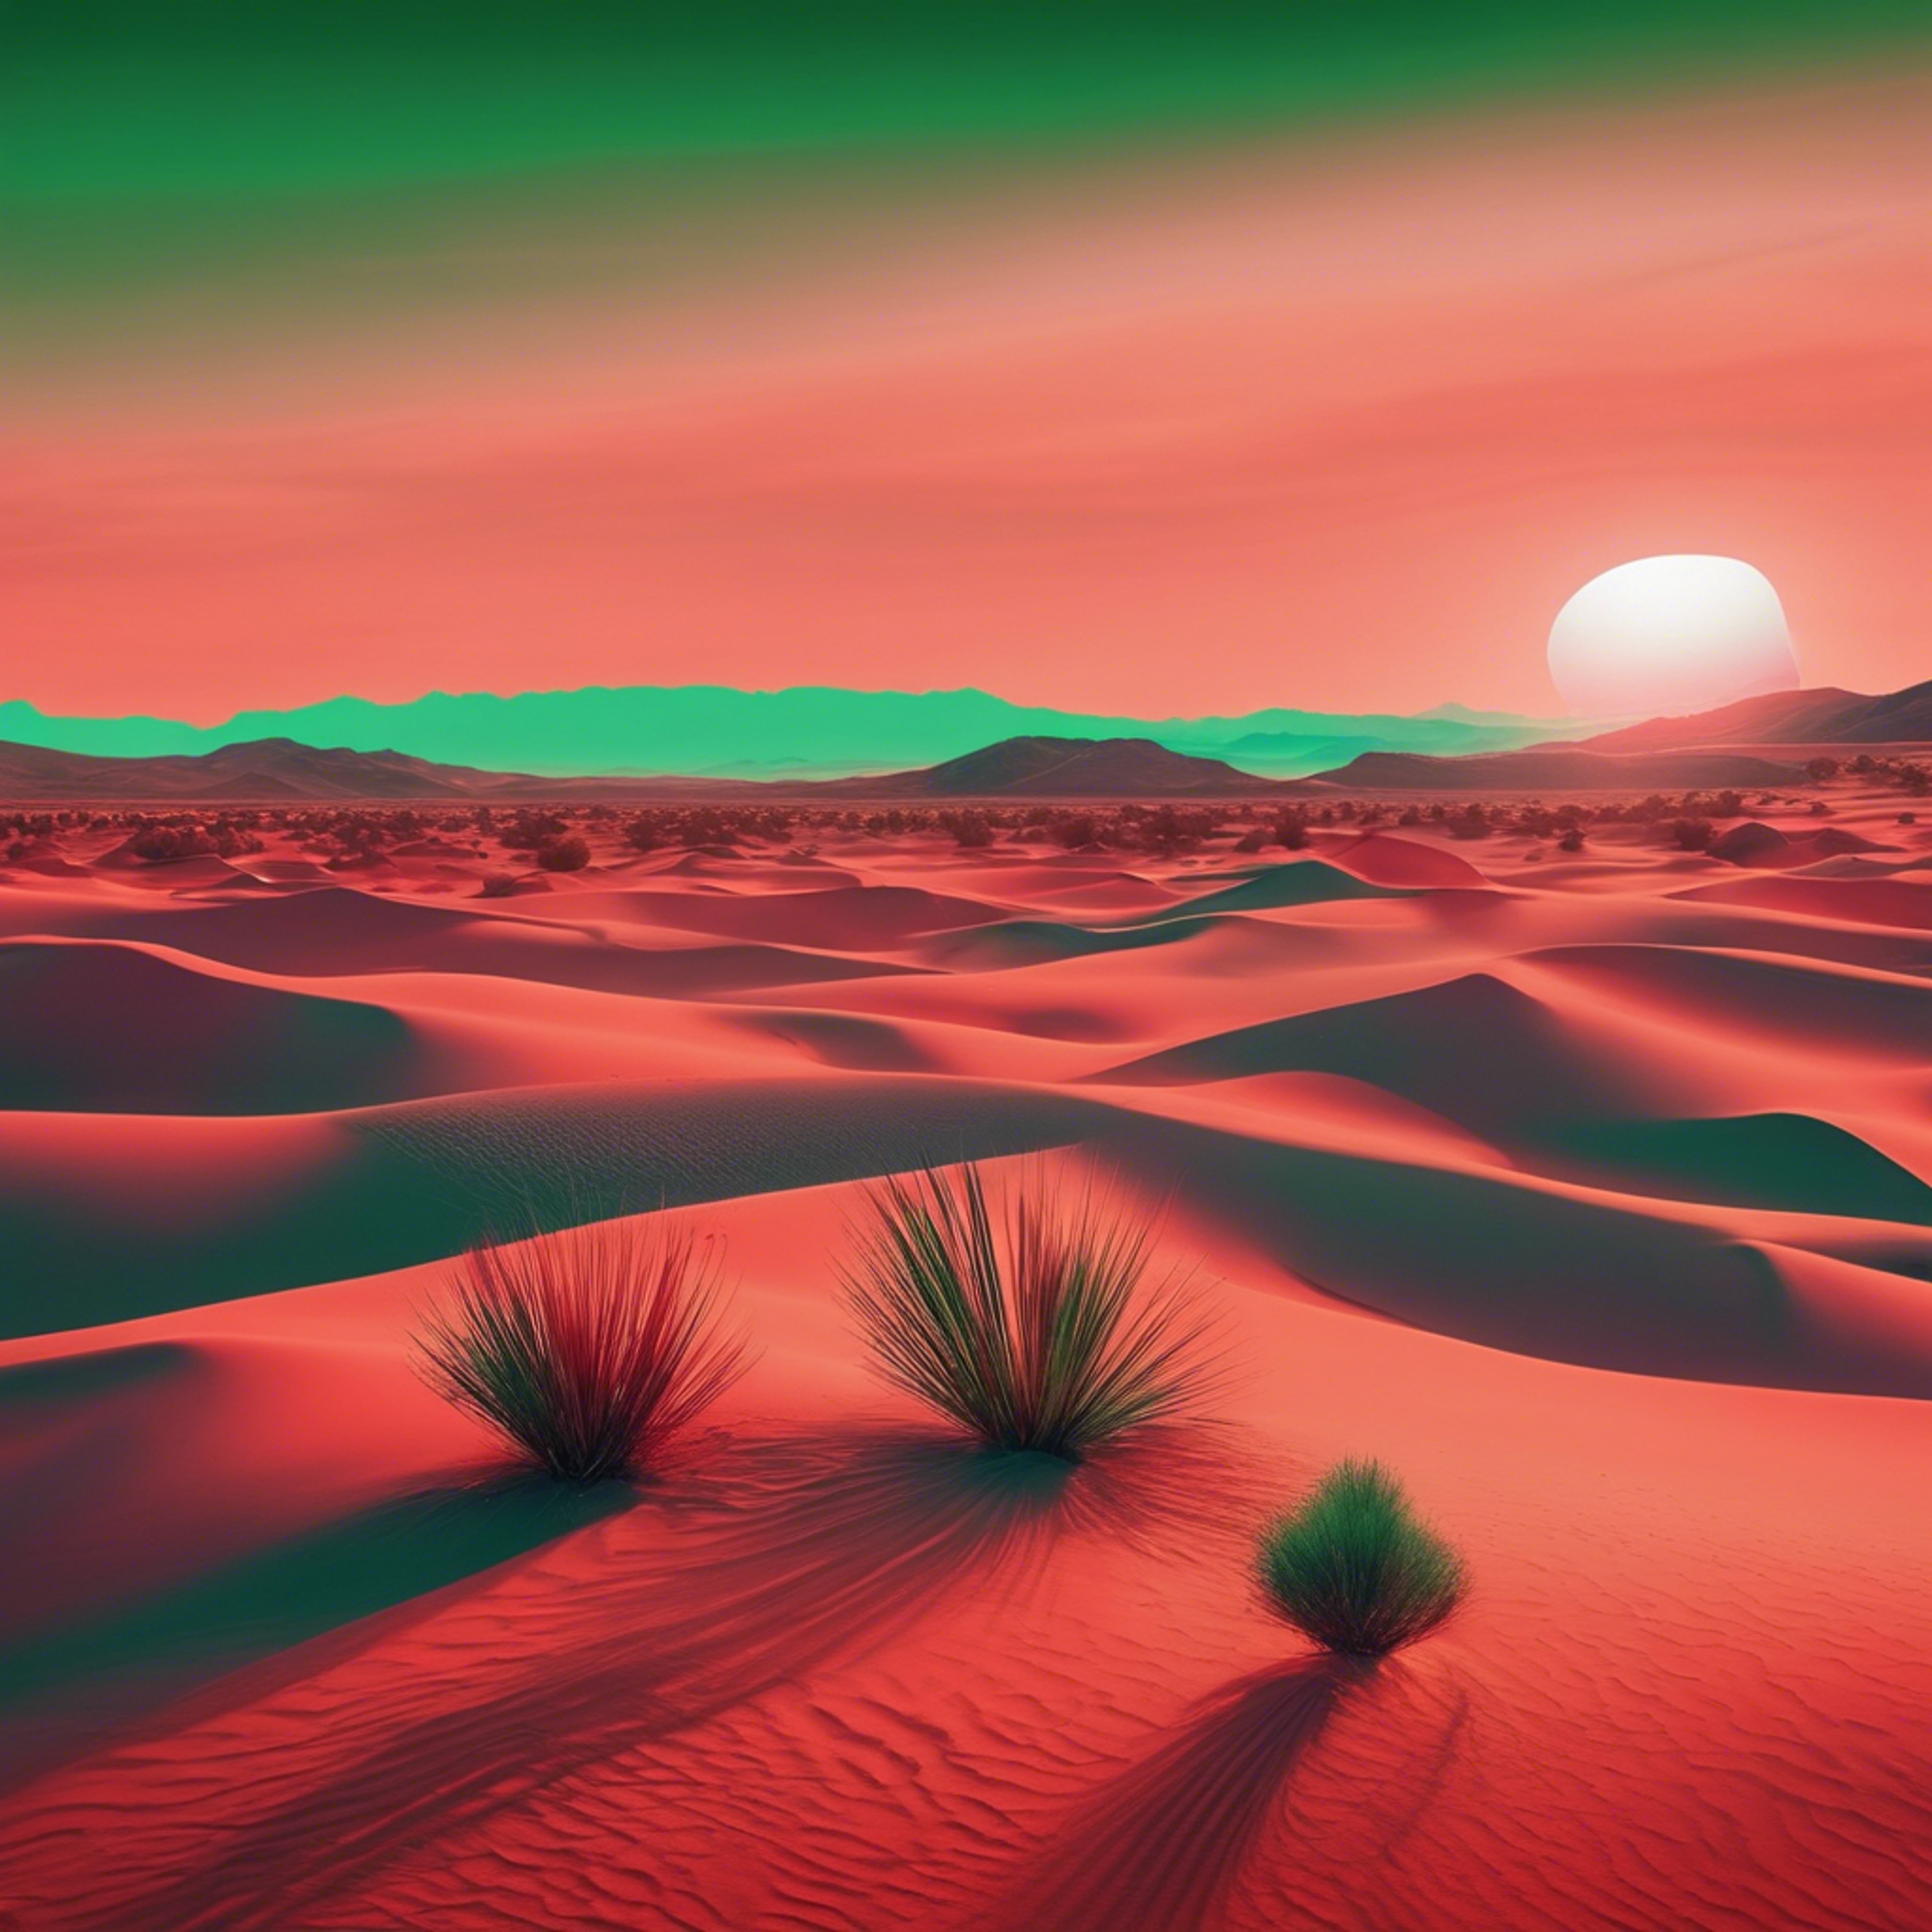 Abstract mirage in red and green, reminiscent of a modern artist's take on a desert sunset Wallpaper[3a4ec3a043b54638a7ad]